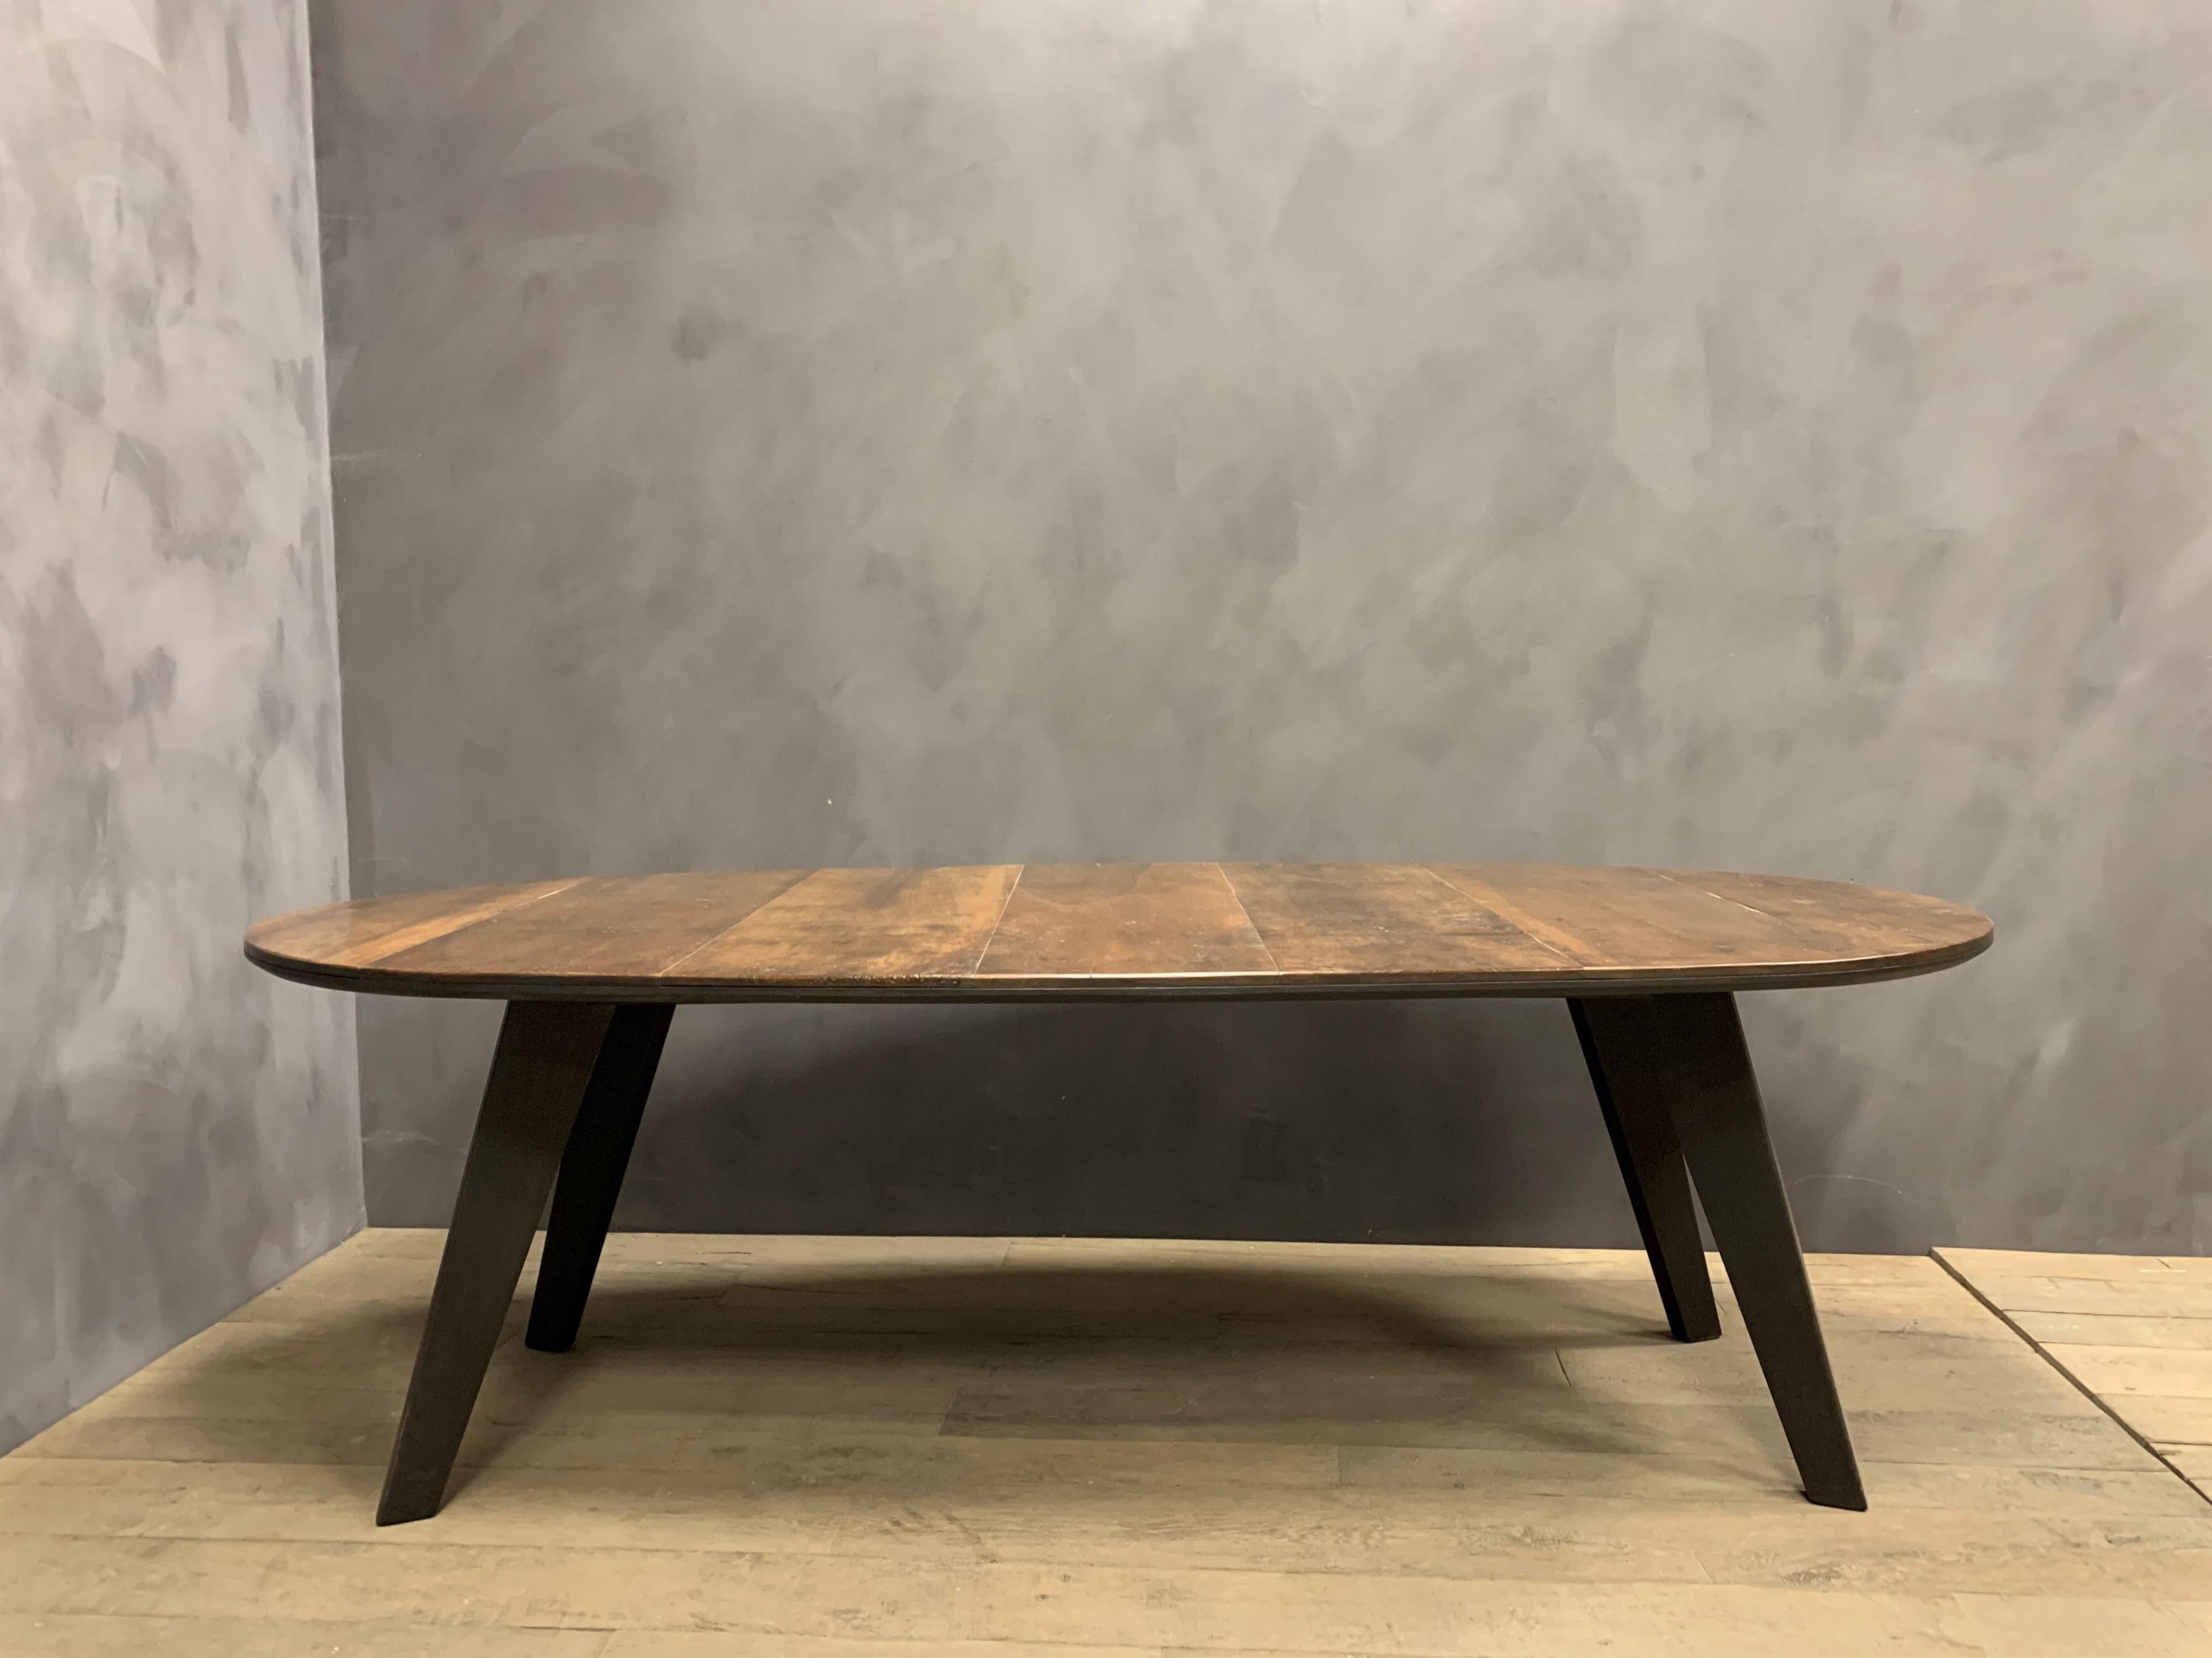 Ou custom made dining table BIL. Inspired by modernist design we combined 18th century Italian walnut with burned oak supports. Please note that the materials we use are never the same as they are handpicked for their compability with each other. So